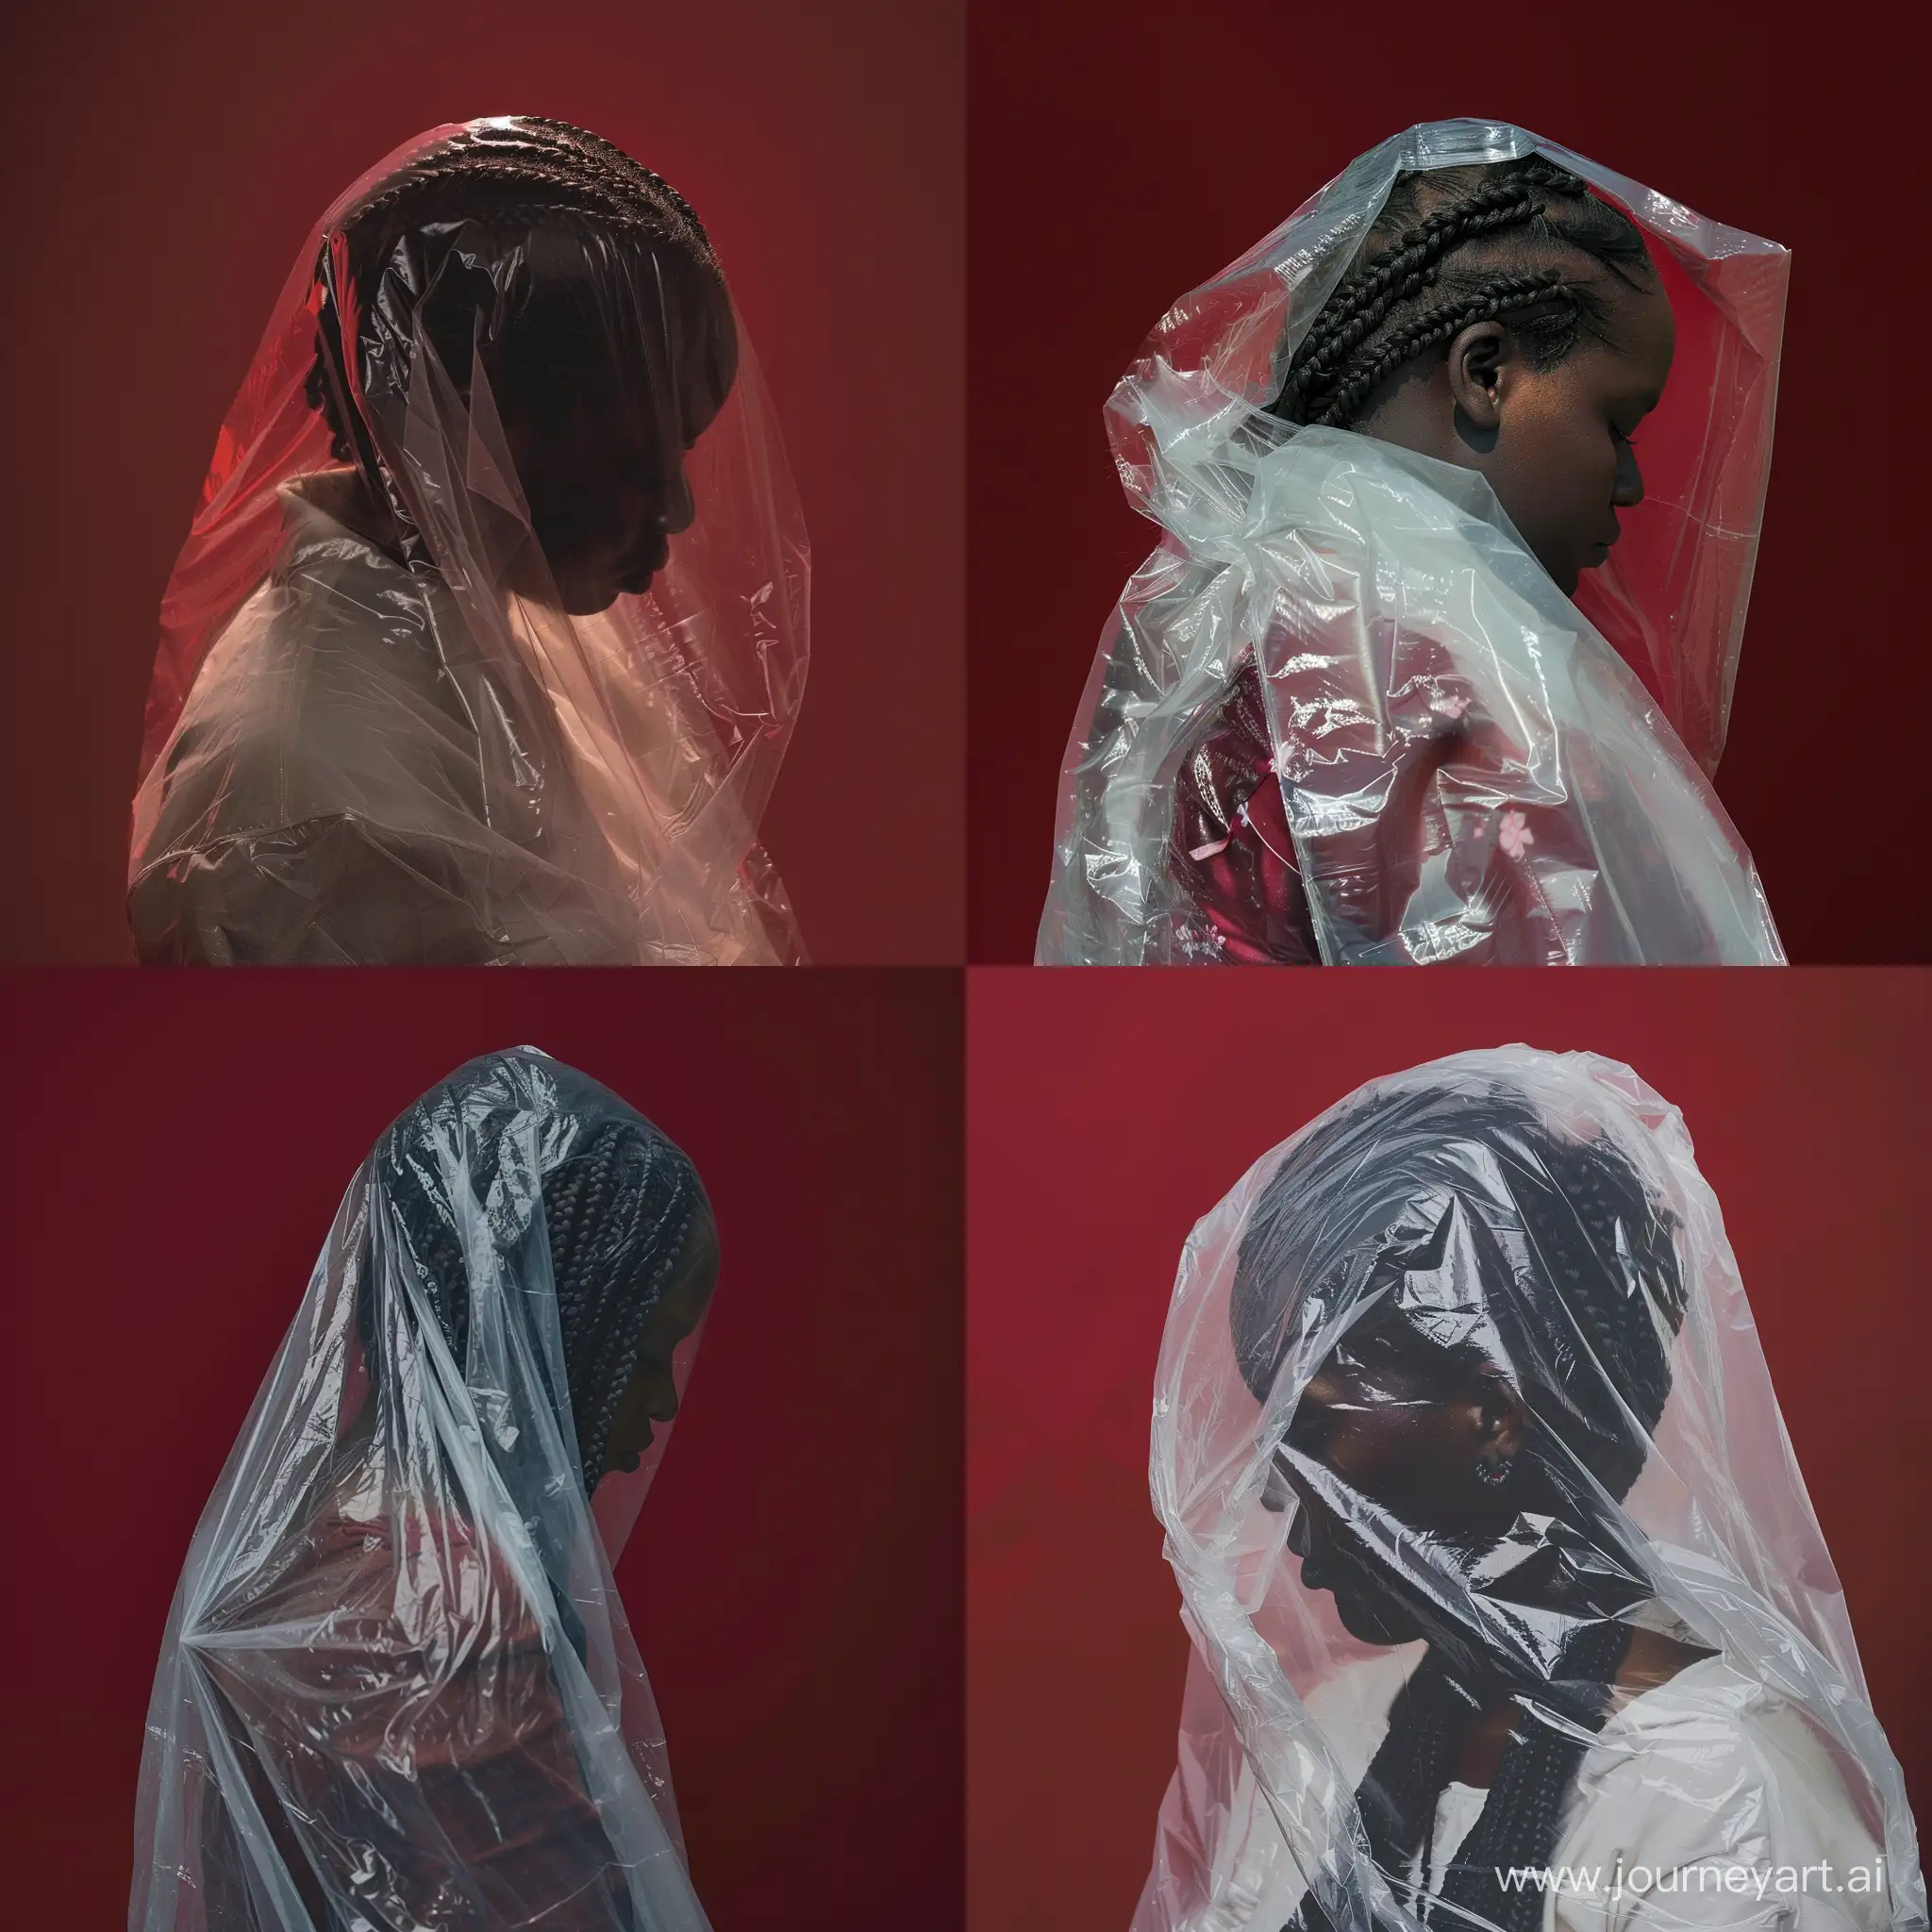 African woman covered in a clear draped plastic bag,in front of a deep red background. She is facing down and she has plaited hair